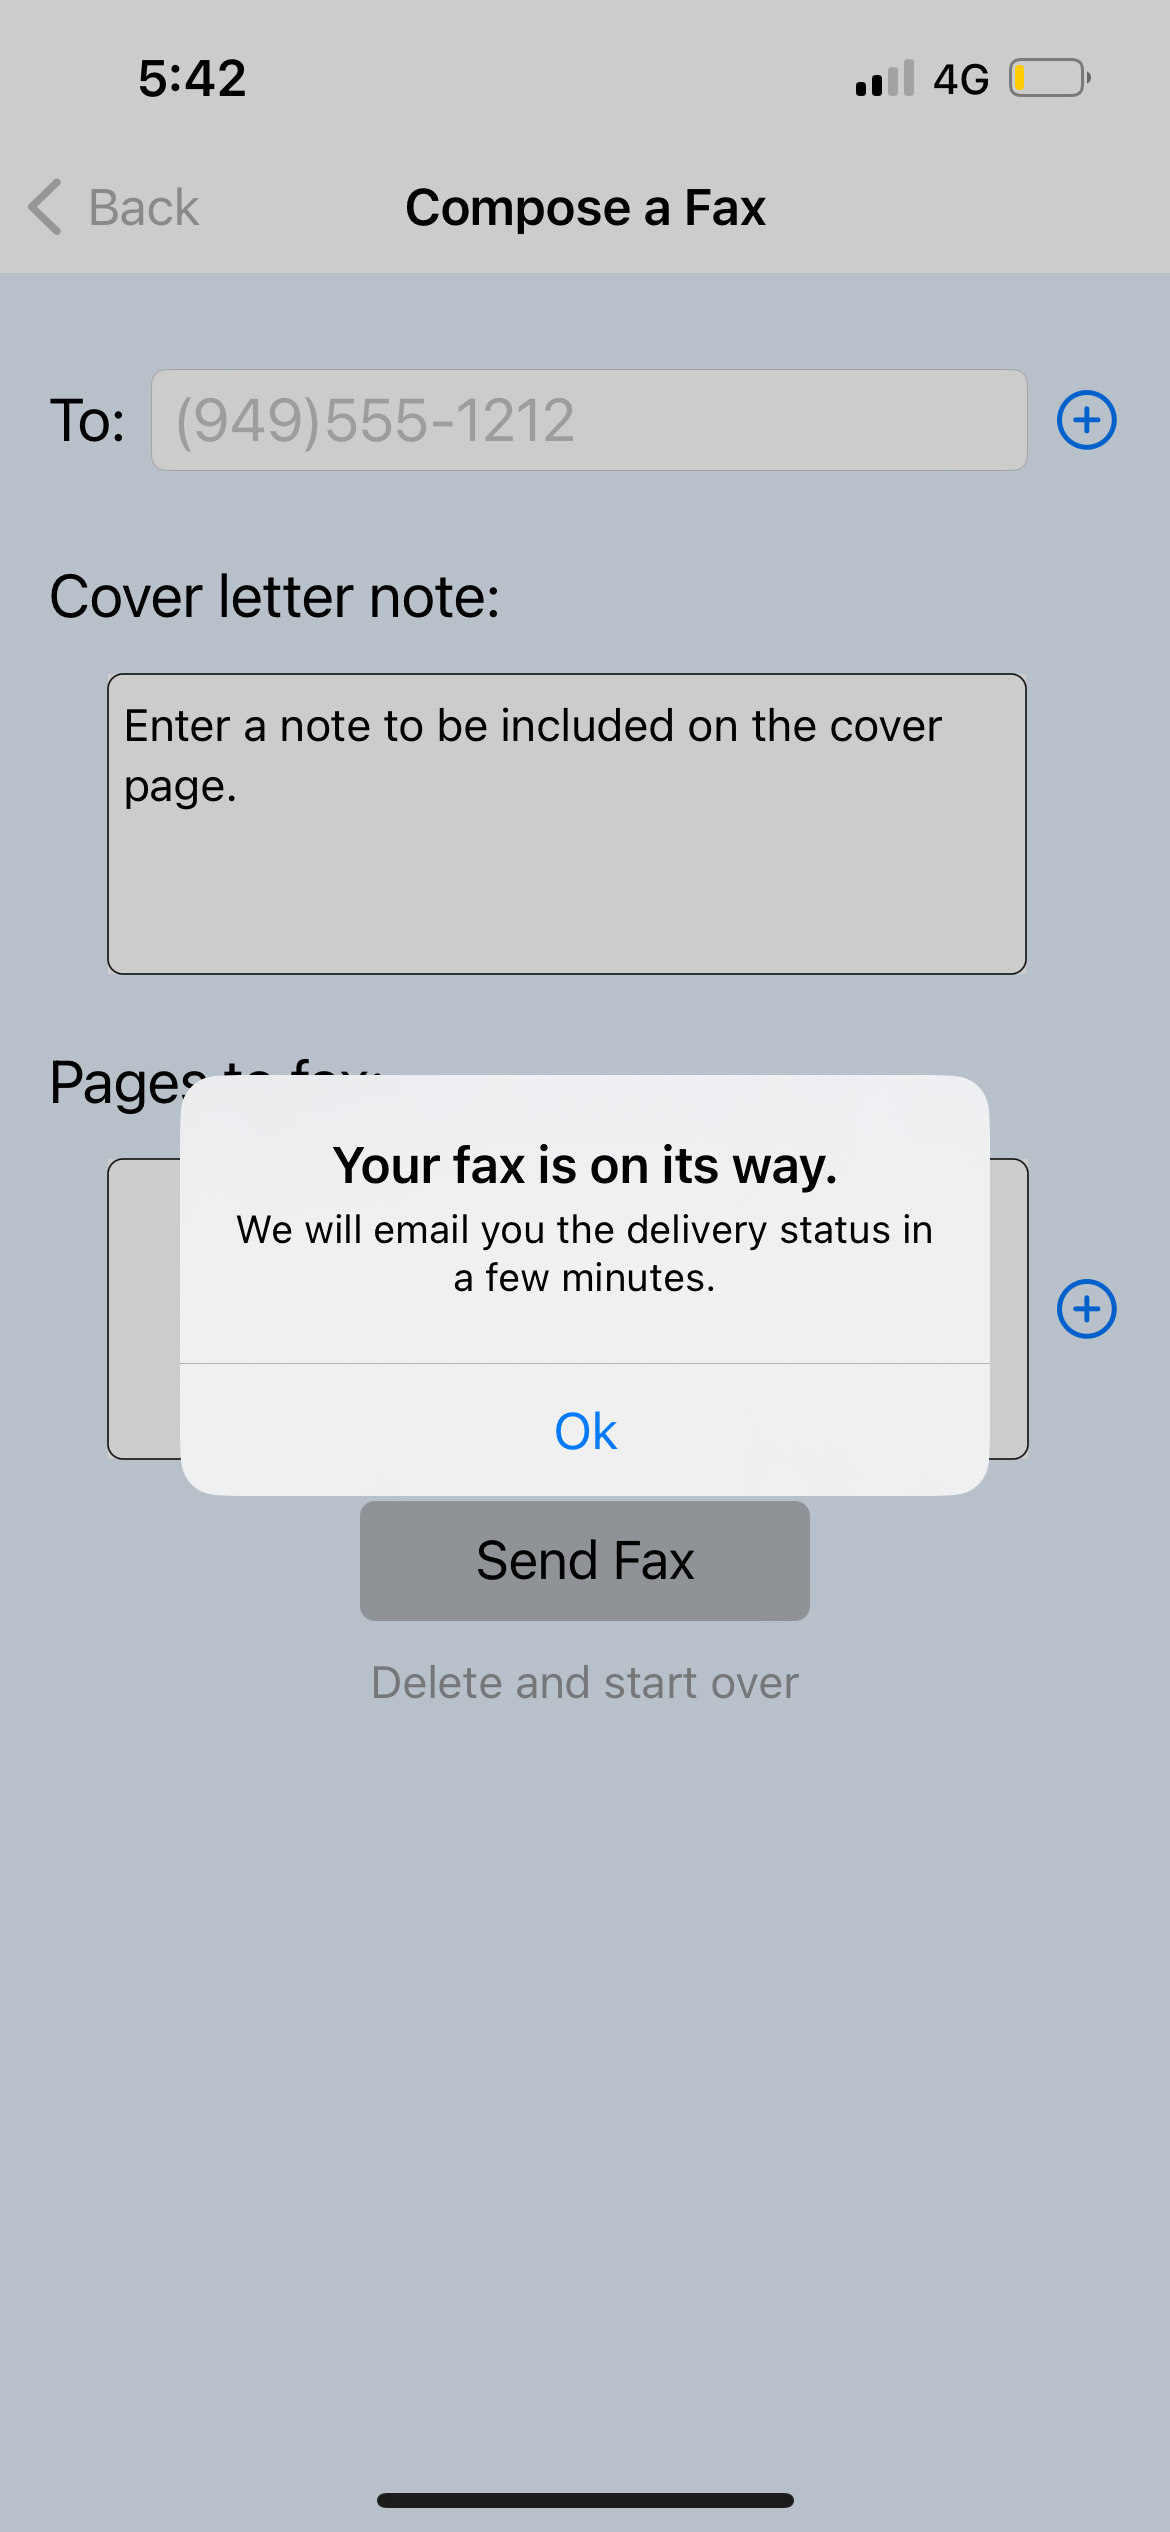 your fax is on its way popup in faxburner